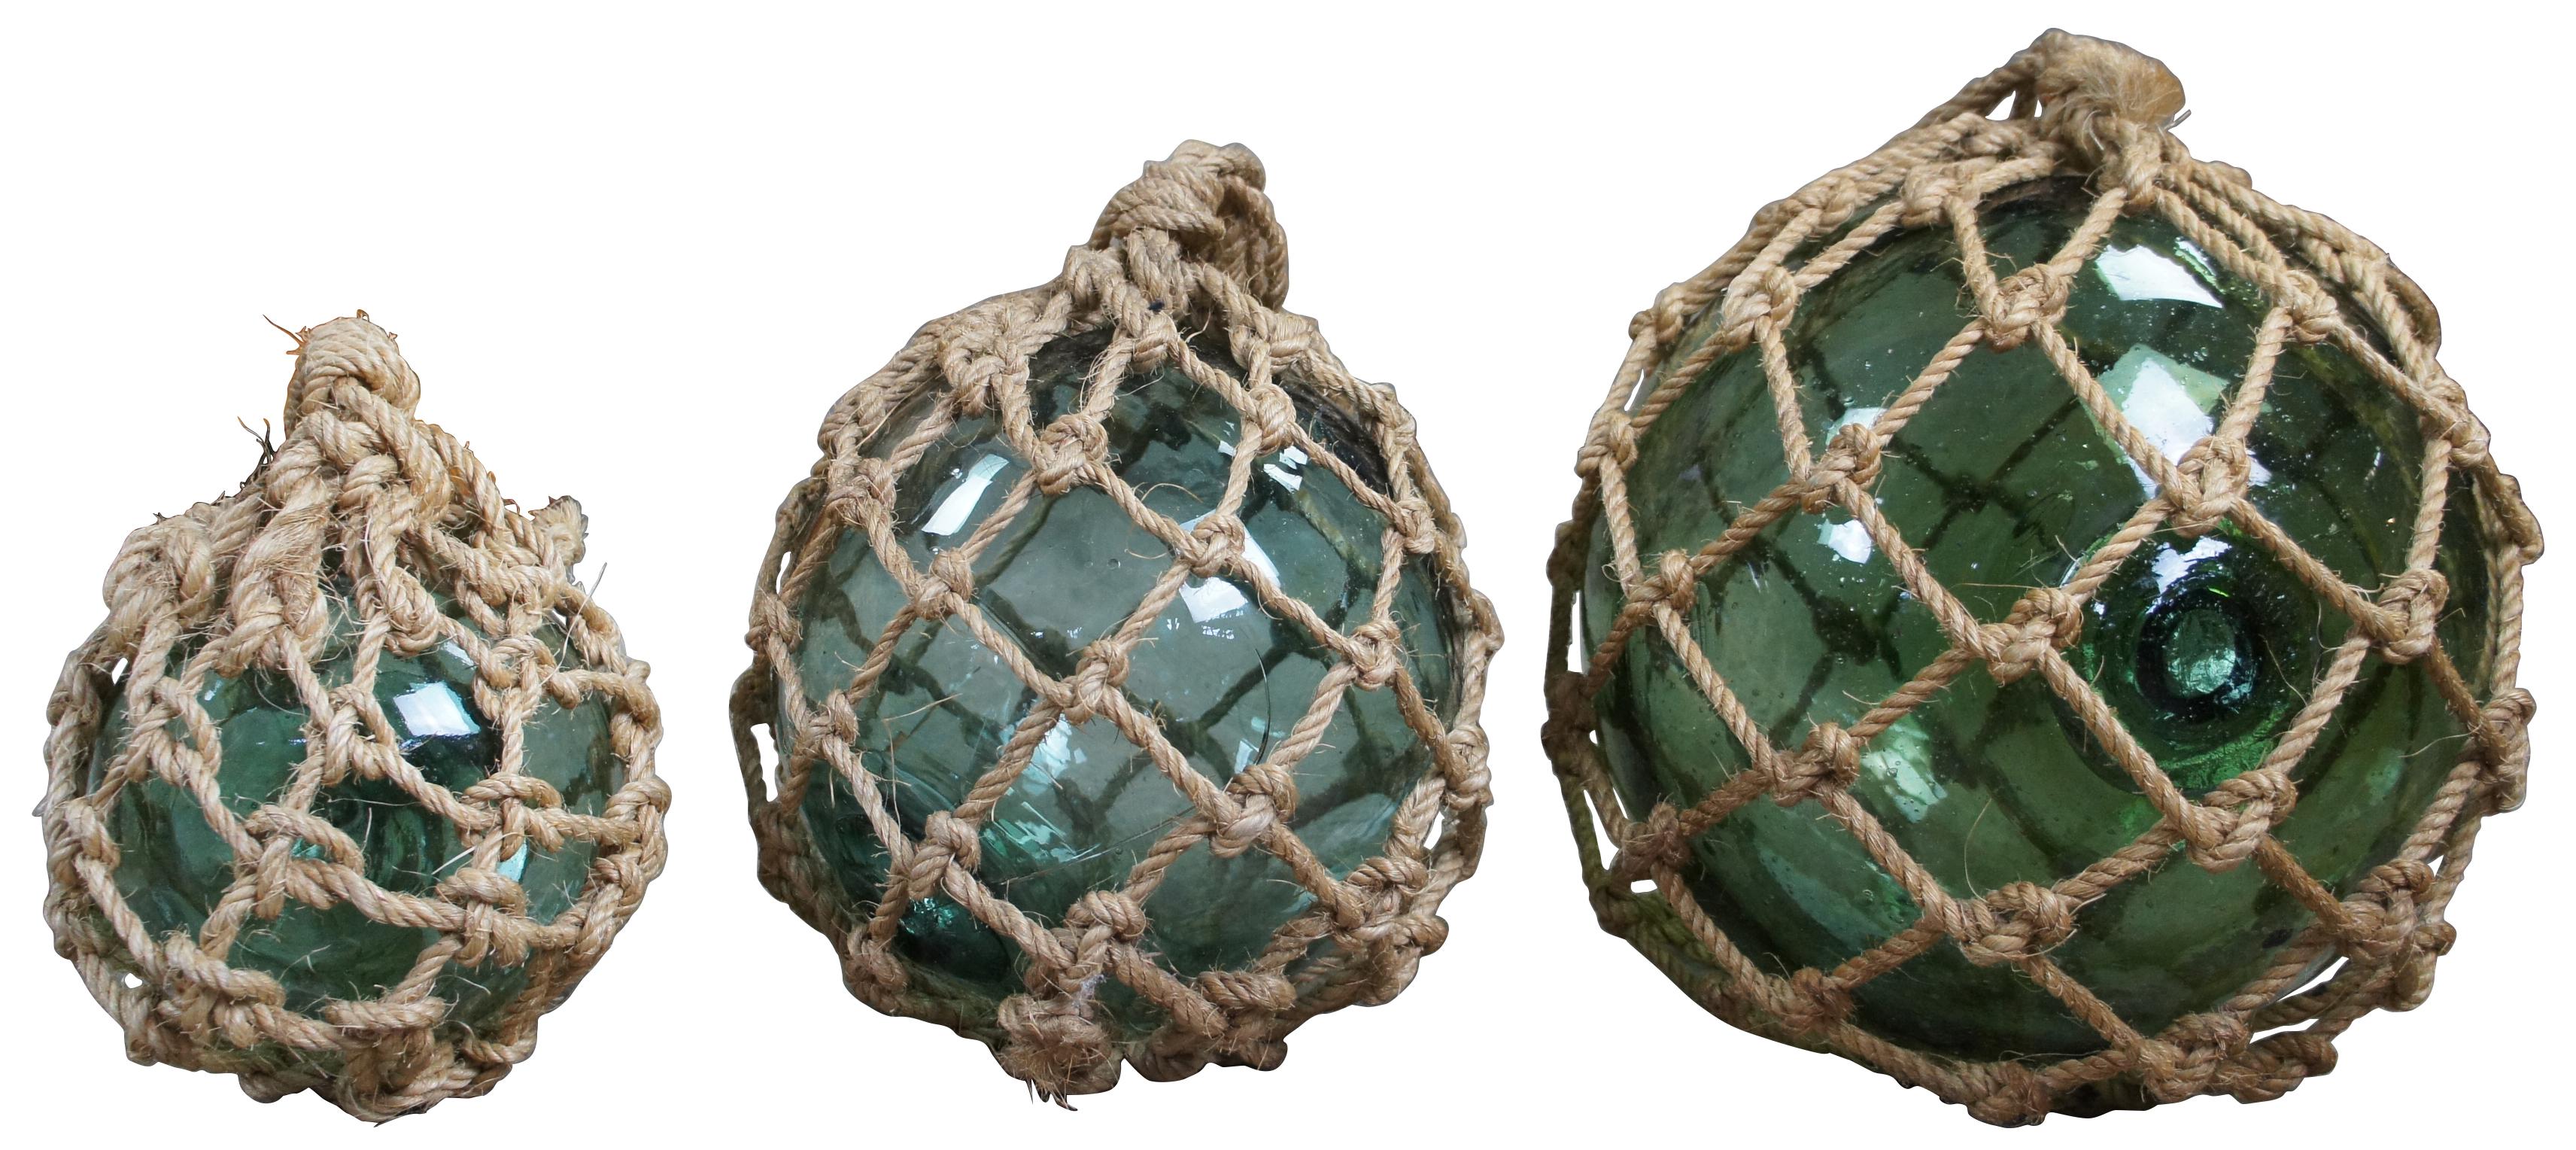 Lot 7 hand blown netted blue Japanese fishing floats. Made from recycled glass bottles and used to buoy a fisherman's net when cast into the water. Feature hand tied knots with hanging loop making them great for use on a dock or displayed in a